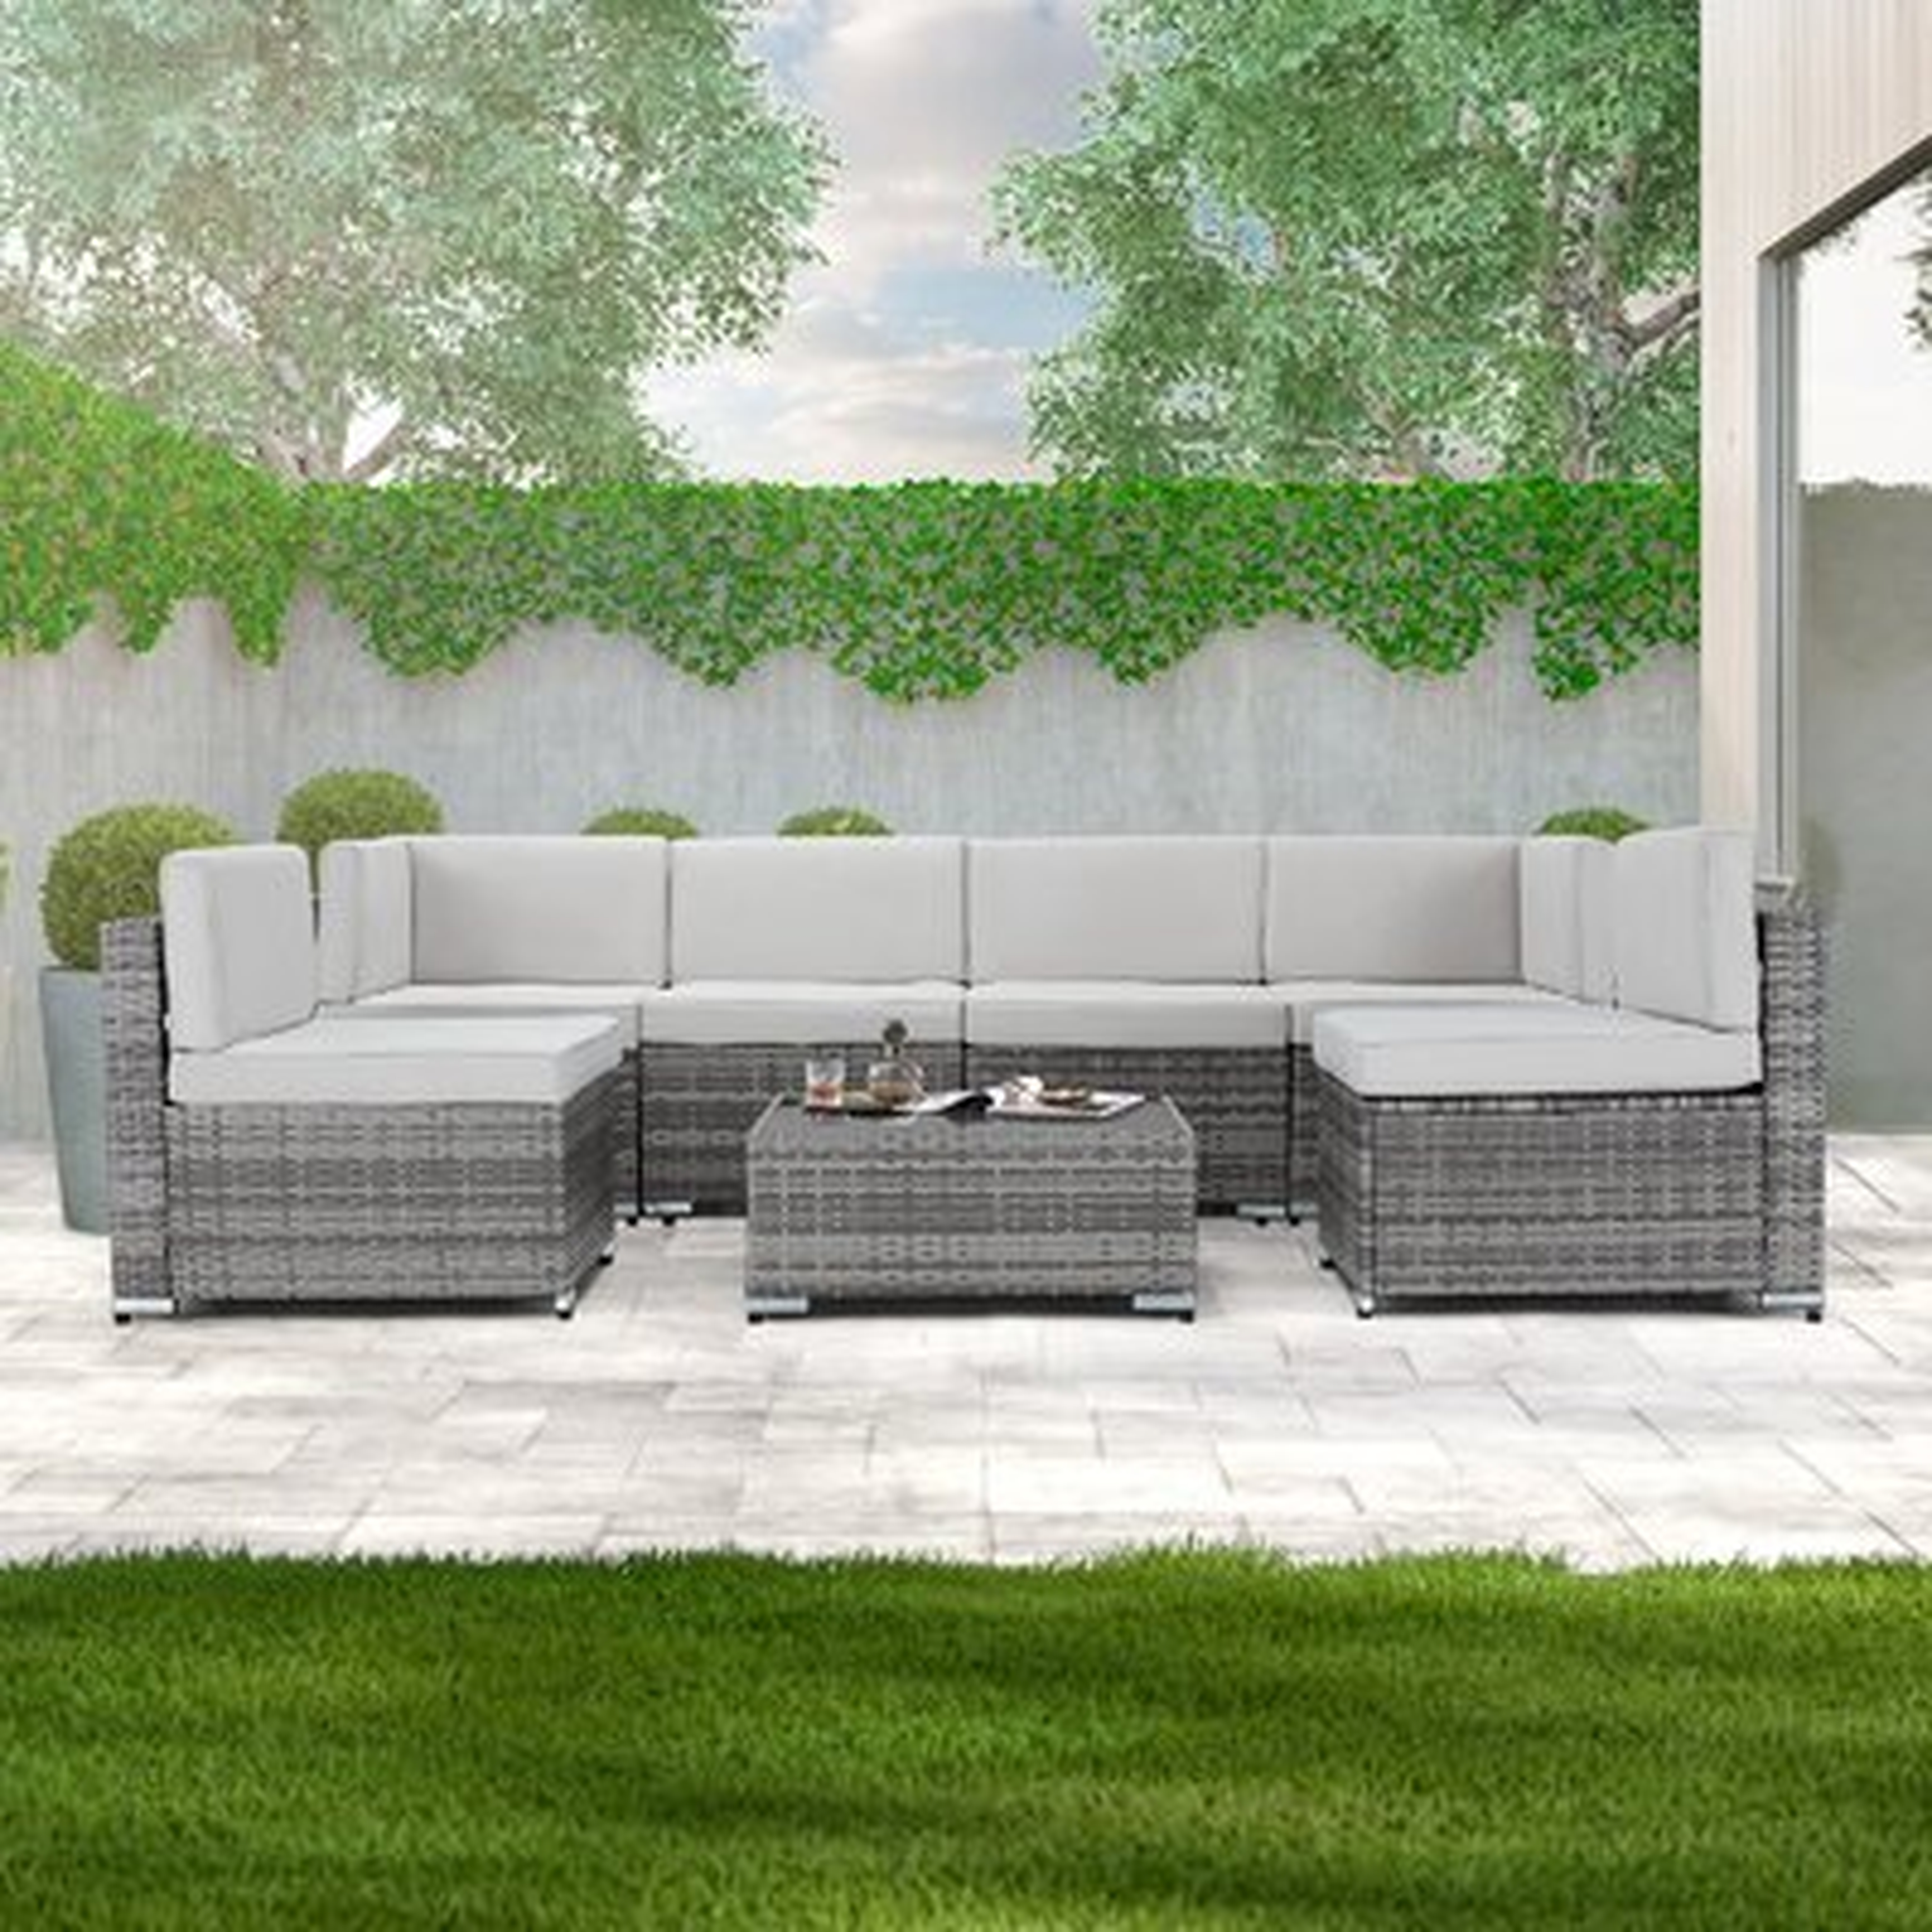 7 Piece Outdoor Patio Furniture Set, Gray Pe Rattan Wicker Sofa Set, Outdoor Sectional Furniture Chair Set With Gray Cushions And Tea Table - Wayfair